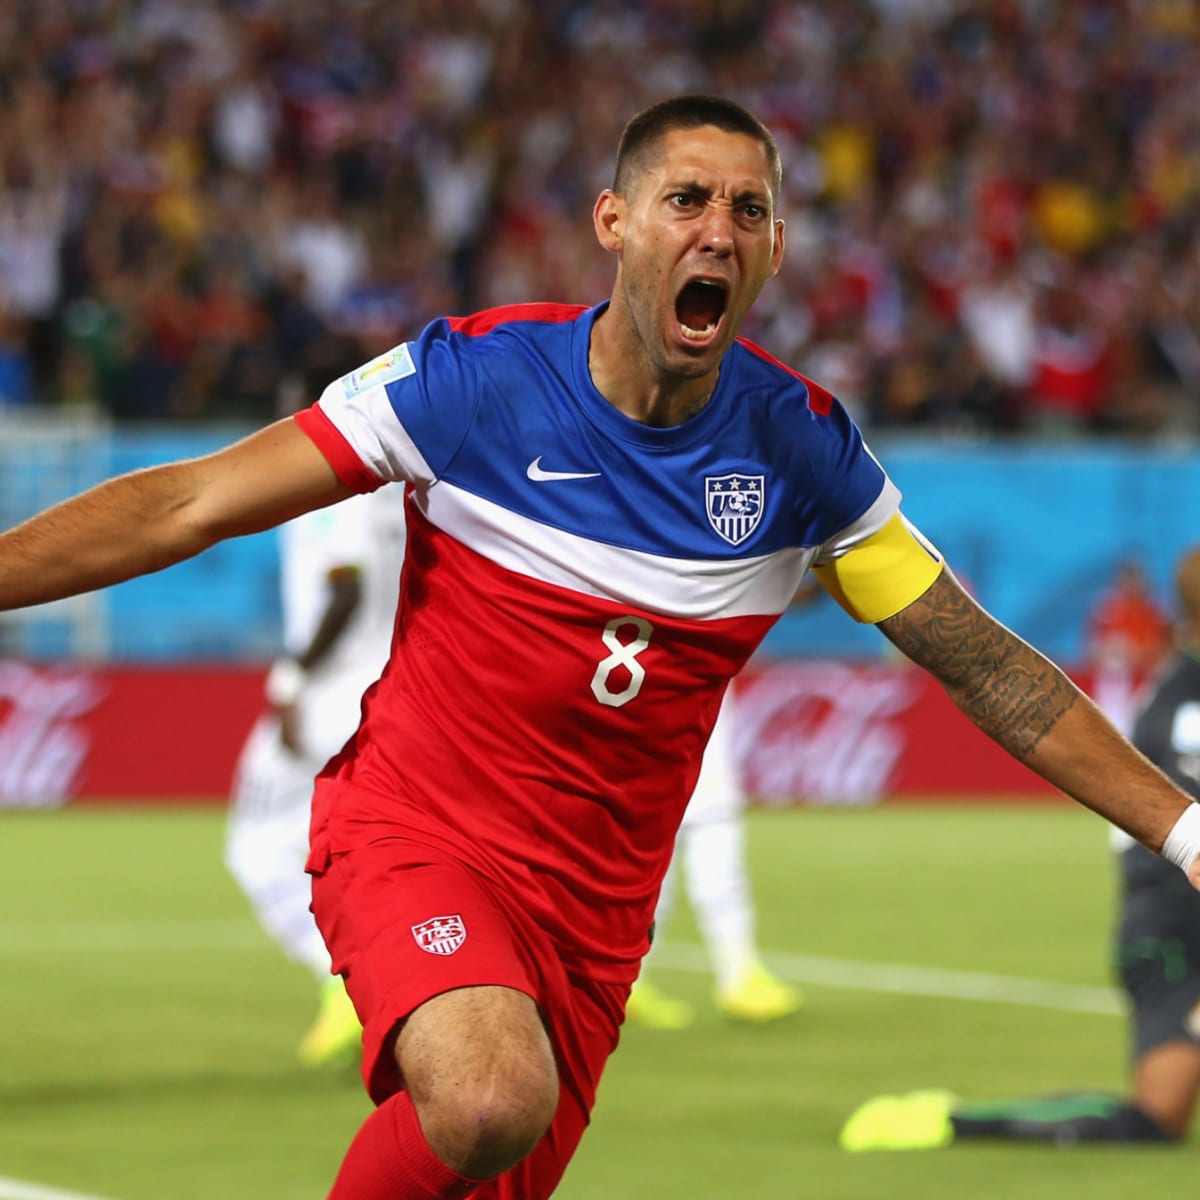 Clint Dempsey Roasted 1 U.S. Soccer Player After Today's Win - The